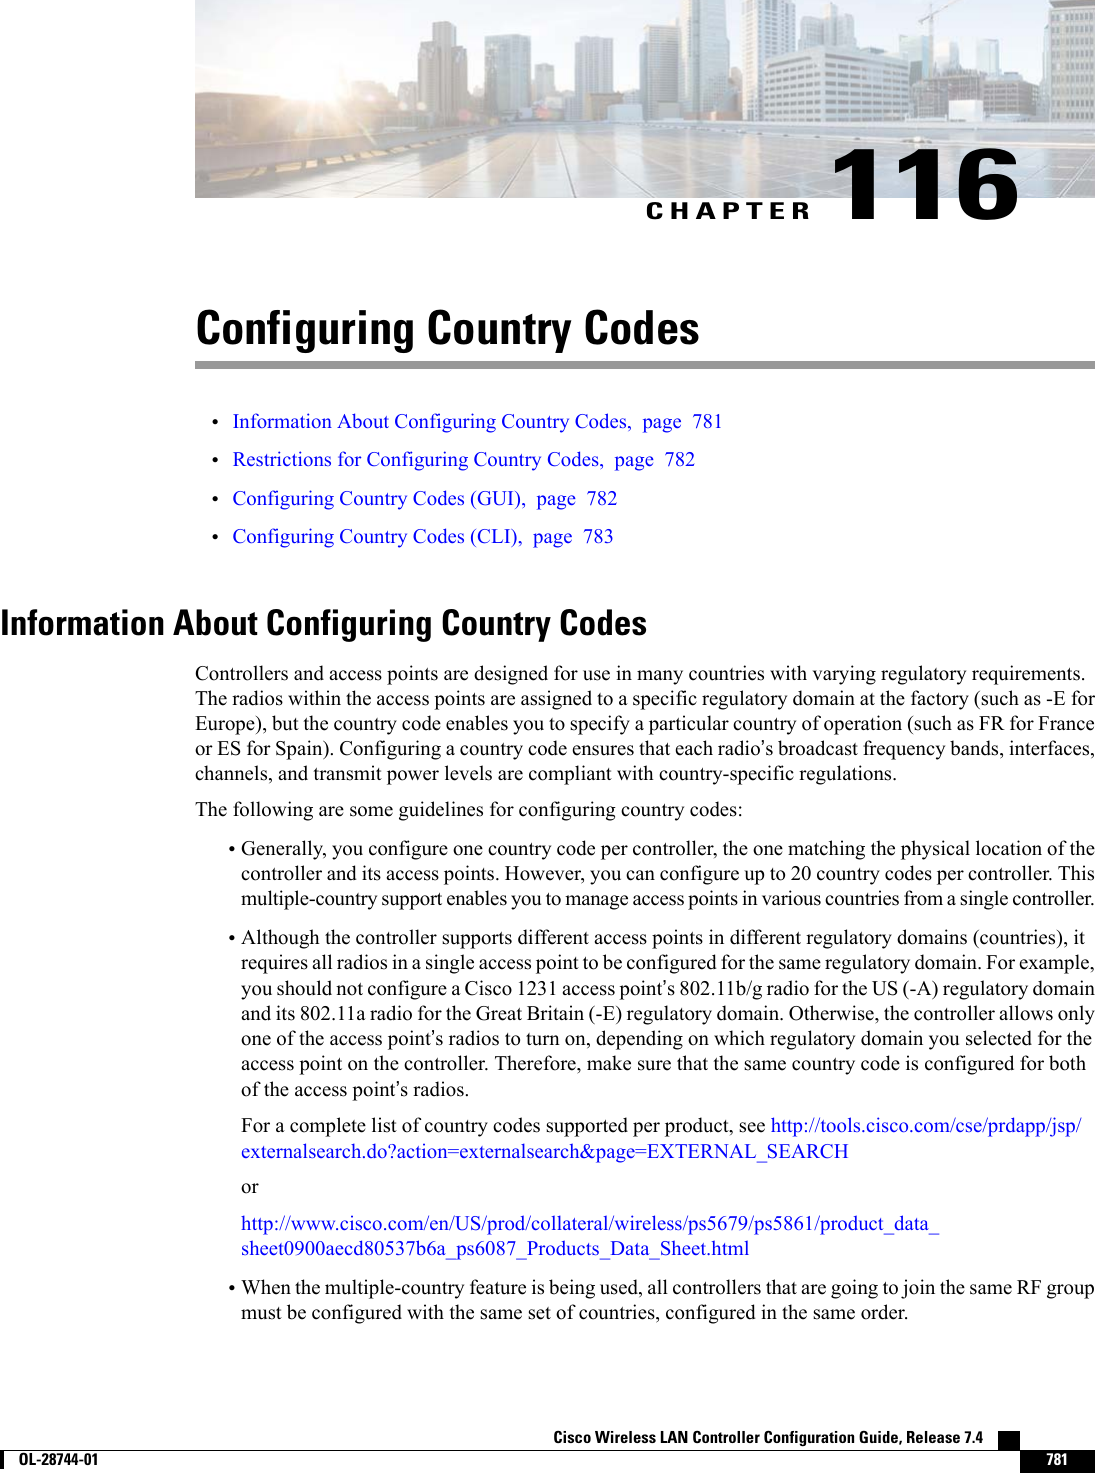 CHAPTER 116Configuring Country Codes•Information About Configuring Country Codes, page 781•Restrictions for Configuring Country Codes, page 782•Configuring Country Codes (GUI), page 782•Configuring Country Codes (CLI), page 783Information About Configuring Country CodesControllers and access points are designed for use in many countries with varying regulatory requirements.The radios within the access points are assigned to a specific regulatory domain at the factory (such as -E forEurope), but the country code enables you to specify a particular country of operation (such as FR for Franceor ES for Spain). Configuring a country code ensures that each radio’s broadcast frequency bands, interfaces,channels, and transmit power levels are compliant with country-specific regulations.The following are some guidelines for configuring country codes:•Generally, you configure one country code per controller, the one matching the physical location of thecontroller and its access points. However, you can configure up to 20 country codes per controller. Thismultiple-country support enables you to manage access points in various countries from a single controller.•Although the controller supports different access points in different regulatory domains (countries), itrequires all radios in a single access point to be configured for the same regulatory domain. For example,you should not configure a Cisco 1231 access point’s 802.11b/g radio for the US (-A) regulatory domainand its 802.11a radio for the Great Britain (-E) regulatory domain. Otherwise, the controller allows onlyone of the access point’s radios to turn on, depending on which regulatory domain you selected for theaccess point on the controller. Therefore, make sure that the same country code is configured for bothof the access point’s radios.For a complete list of country codes supported per product, see http://tools.cisco.com/cse/prdapp/jsp/externalsearch.do?action=externalsearch&amp;page=EXTERNAL_SEARCHorhttp://www.cisco.com/en/US/prod/collateral/wireless/ps5679/ps5861/product_data_sheet0900aecd80537b6a_ps6087_Products_Data_Sheet.html•When the multiple-country feature is being used, all controllers that are going to join the same RF groupmust be configured with the same set of countries, configured in the same order.Cisco Wireless LAN Controller Configuration Guide, Release 7.4        OL-28744-01 781